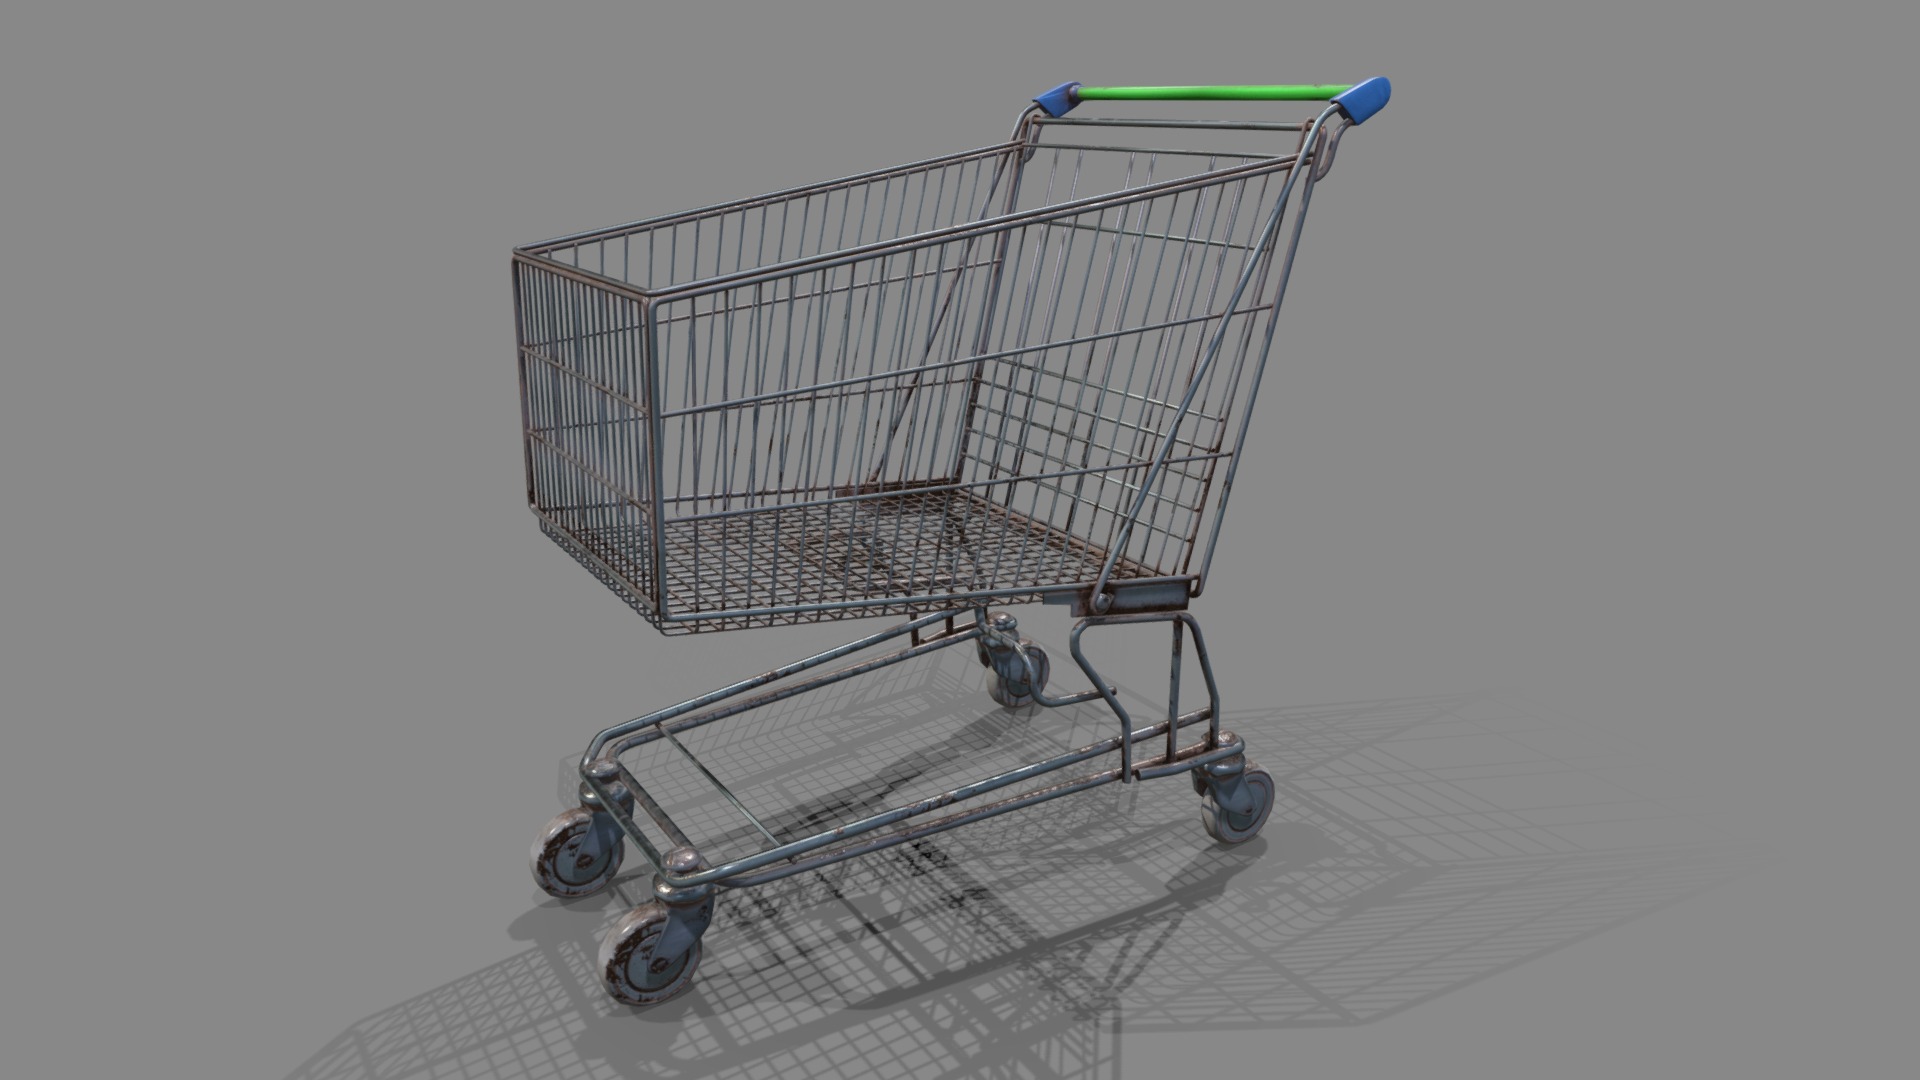 3D model Trolley - This is a 3D model of the Trolley. The 3D model is about a shopping cart with a green light.